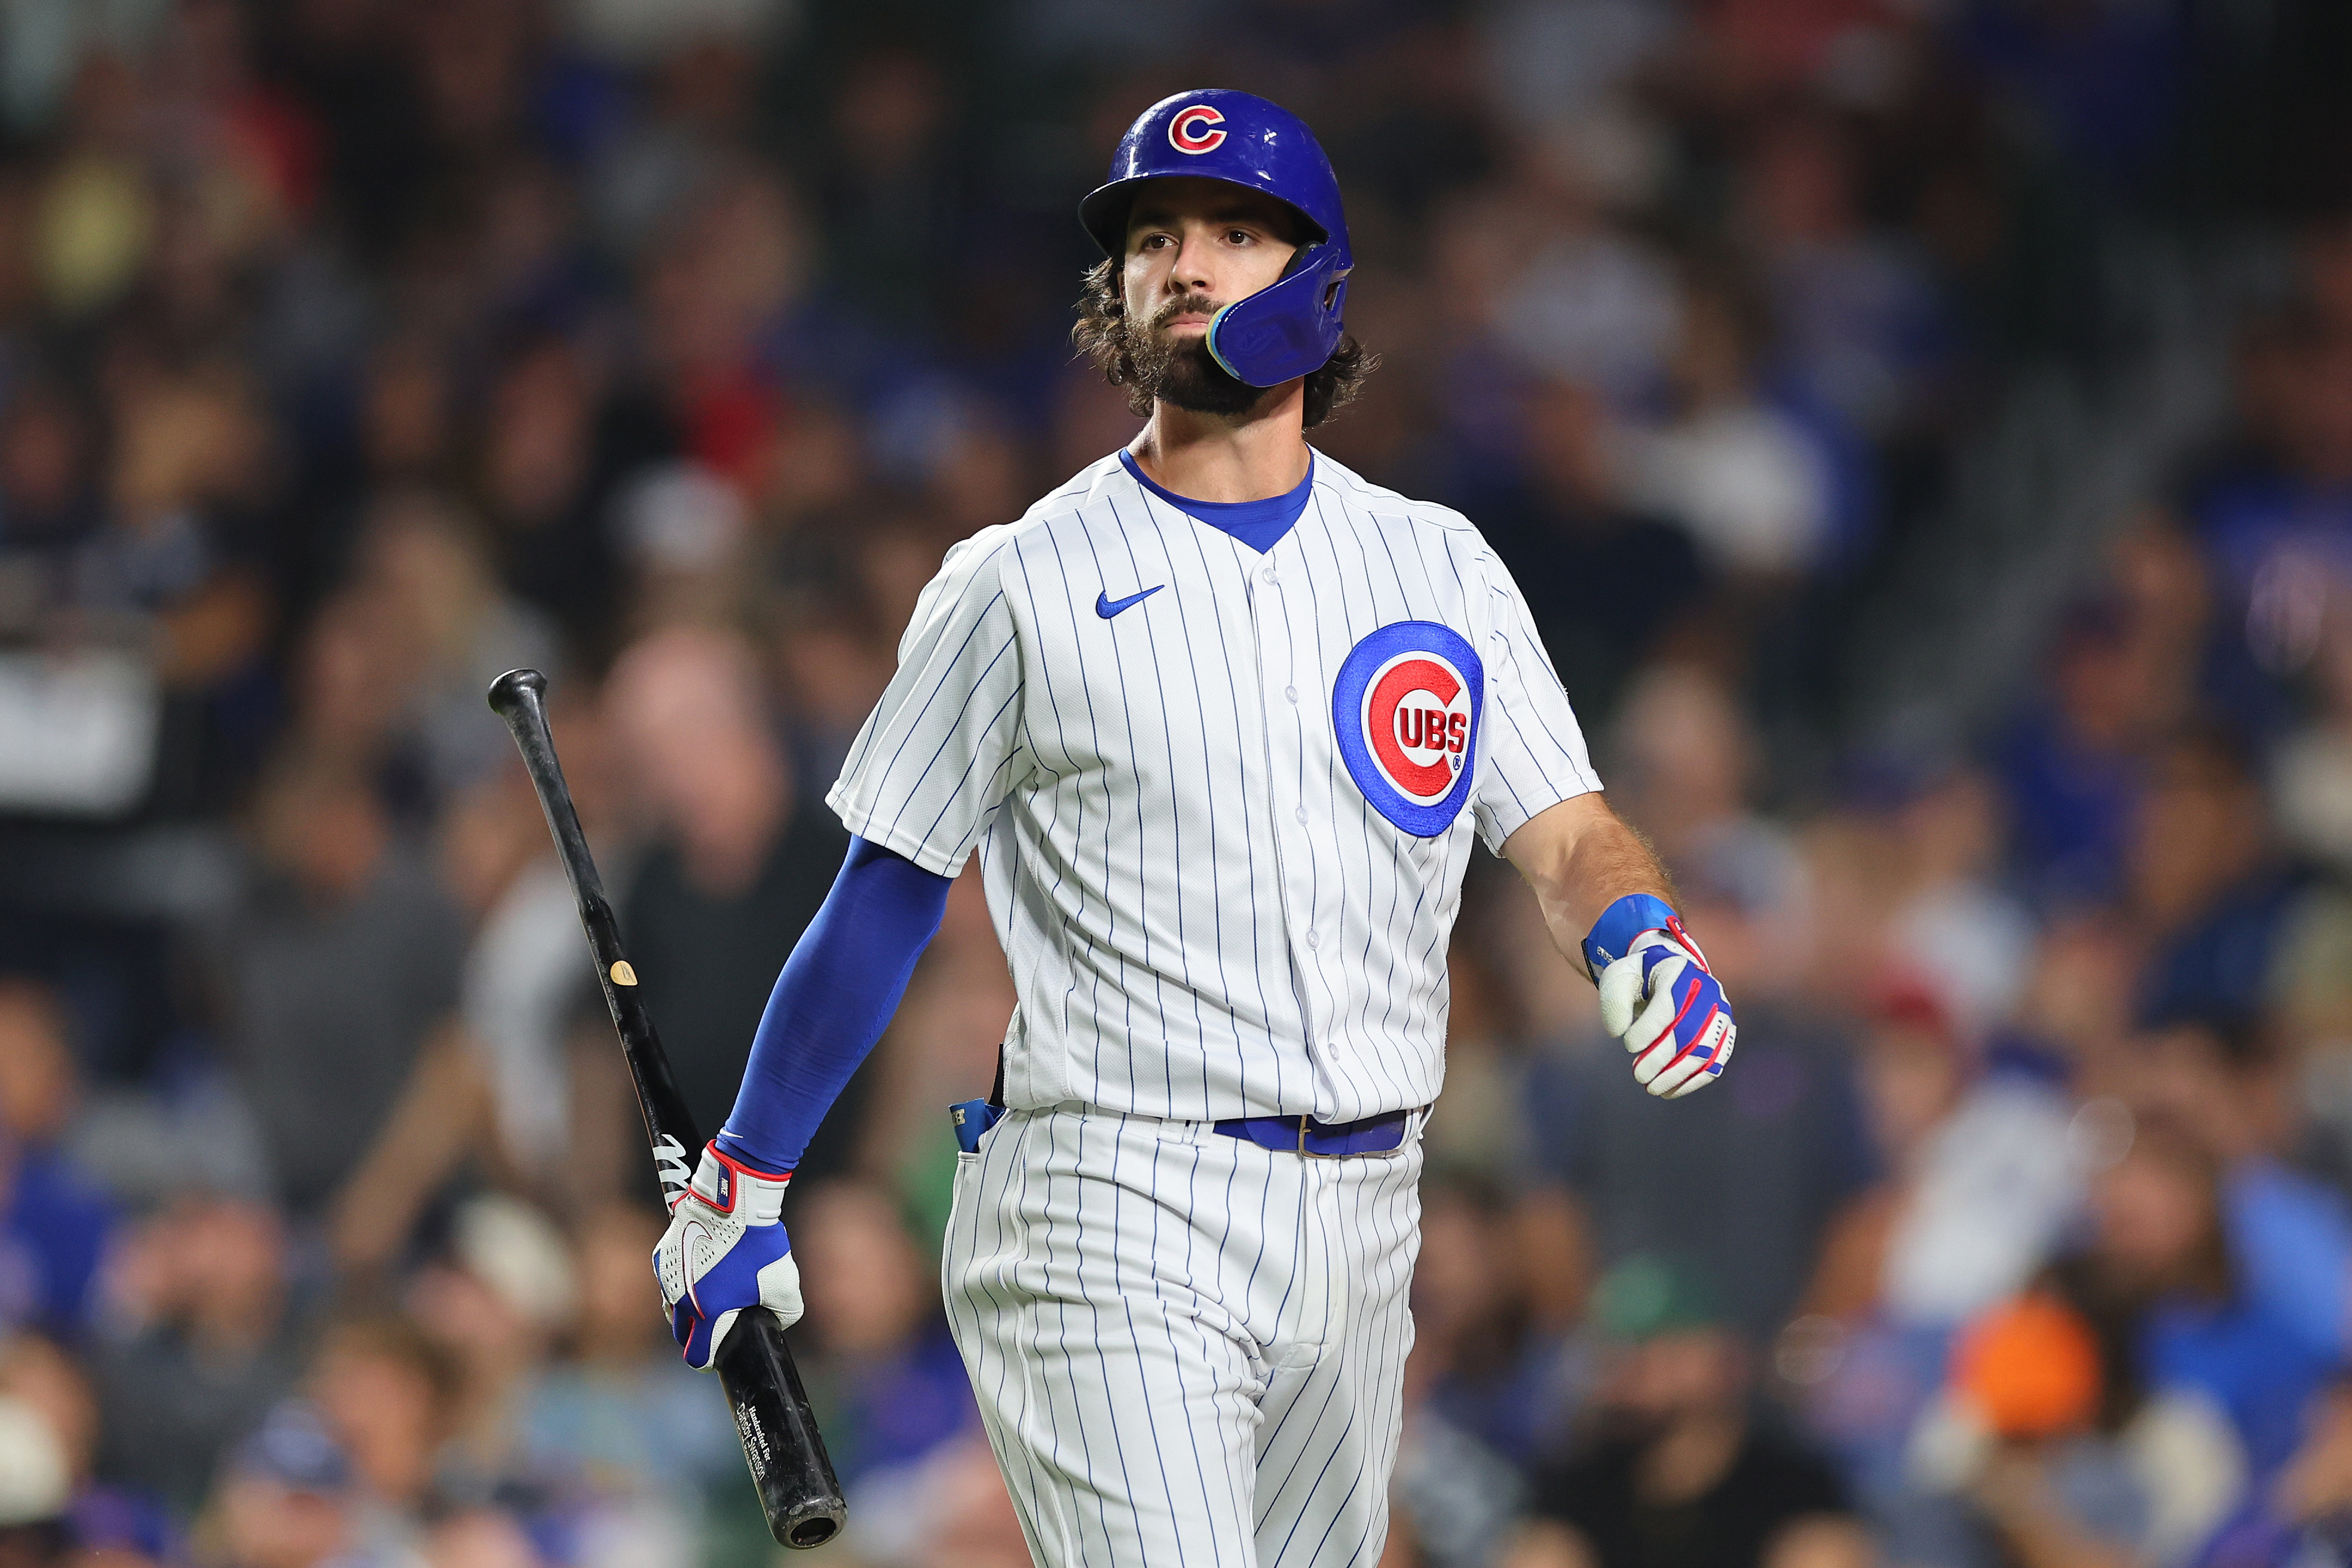 Here is the Cubs' magic number for an MLB playoff berth